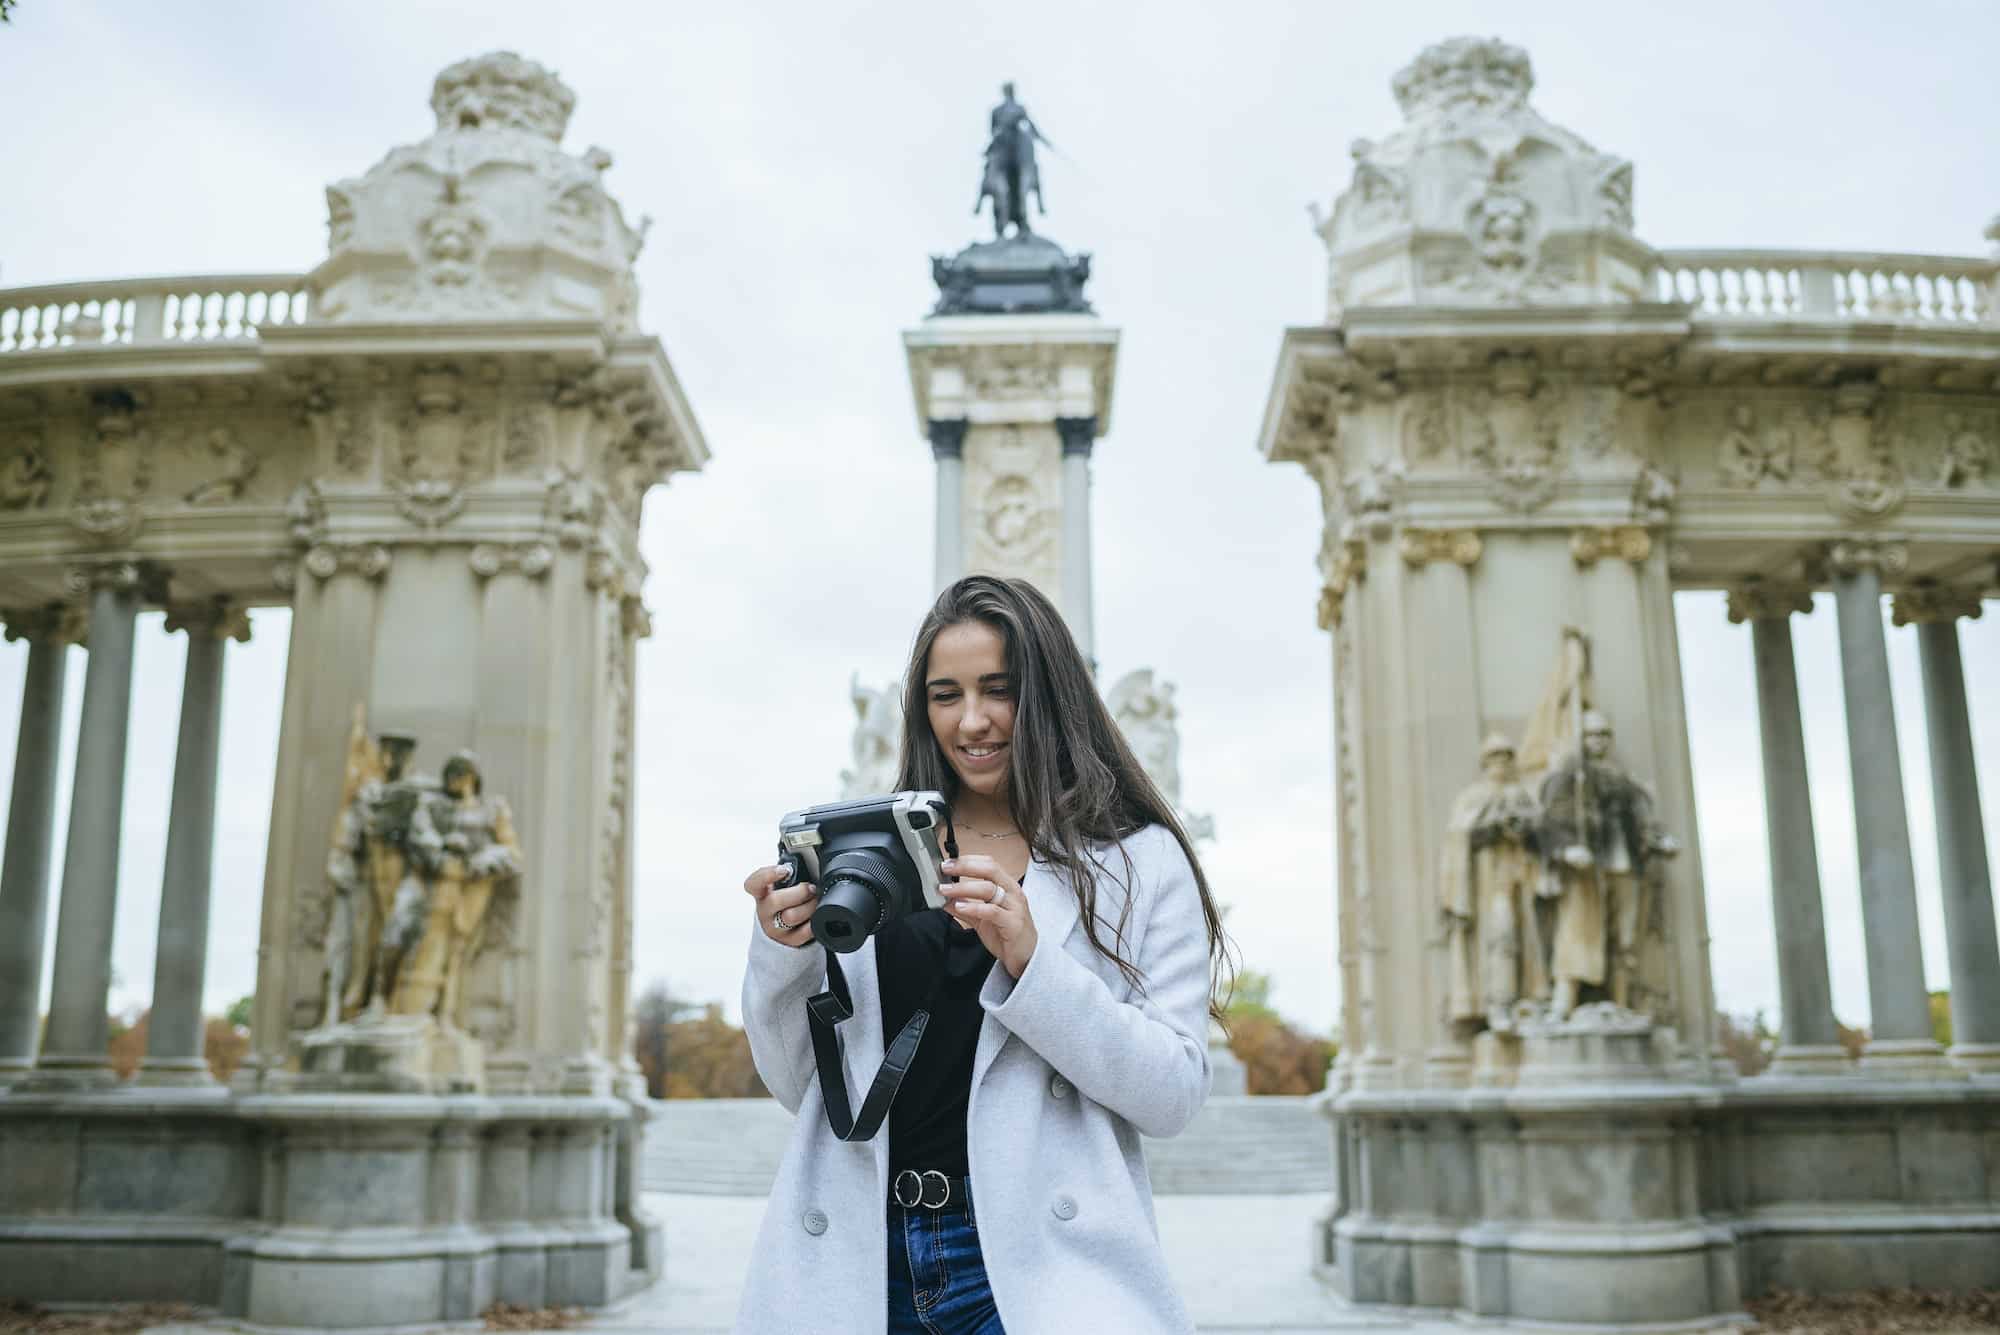 Smiling woman with a camera standing in front of Alfonso XII monument in El Retiro park, Madrid, Spa